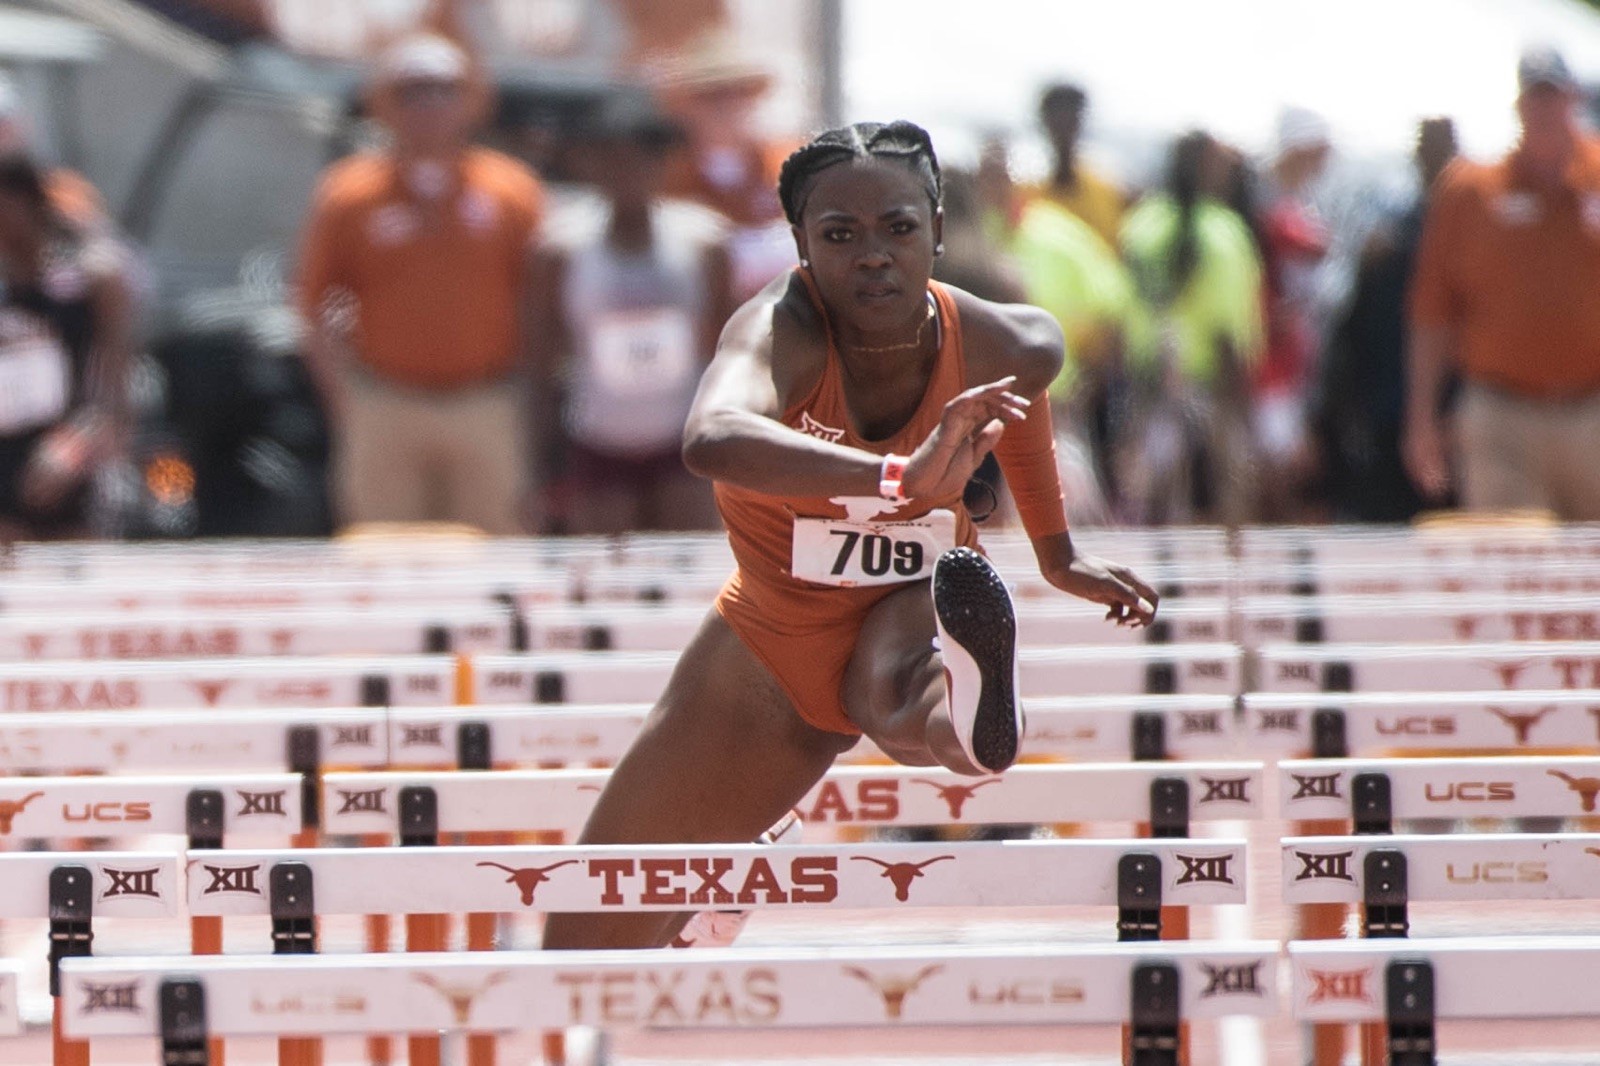 Burton hits top form with 12.64 at Texas Relays